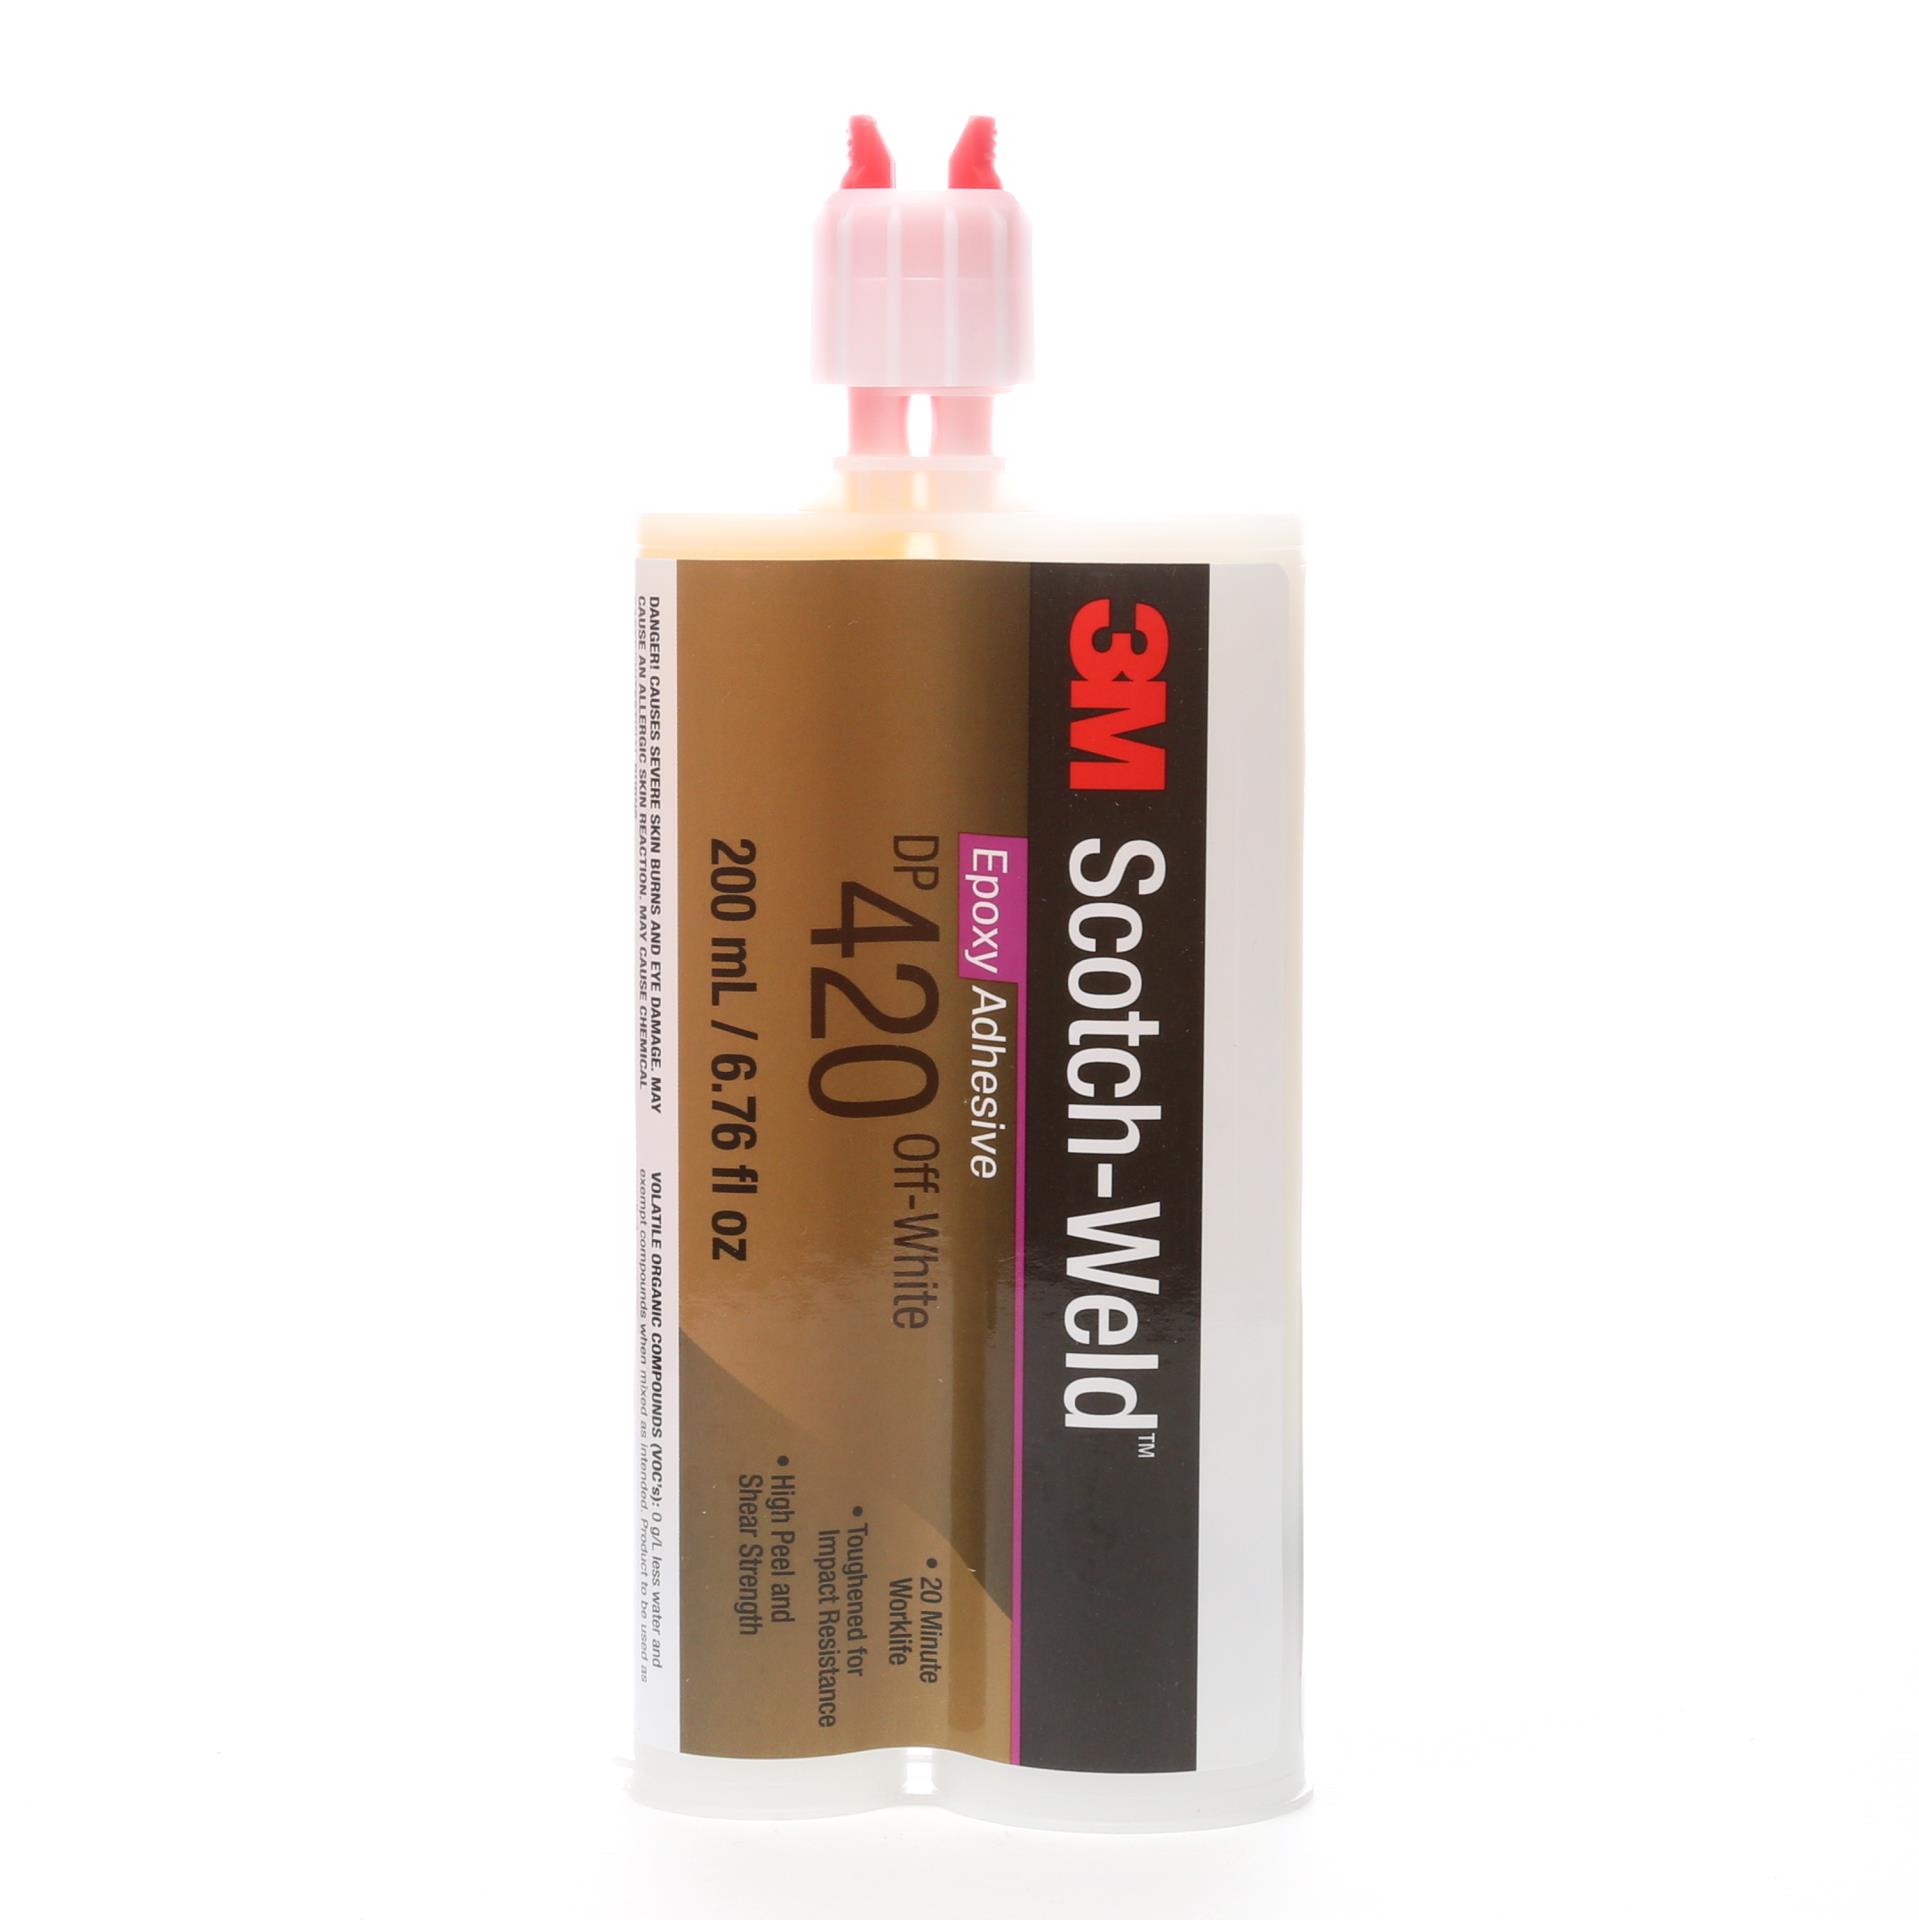 https://www.e-aircraftsupply.com/ItemImages/50/7010329550_3M_Scotch-Weld_Epoxy_Adhesive_DP420LH_Off-White.jpg